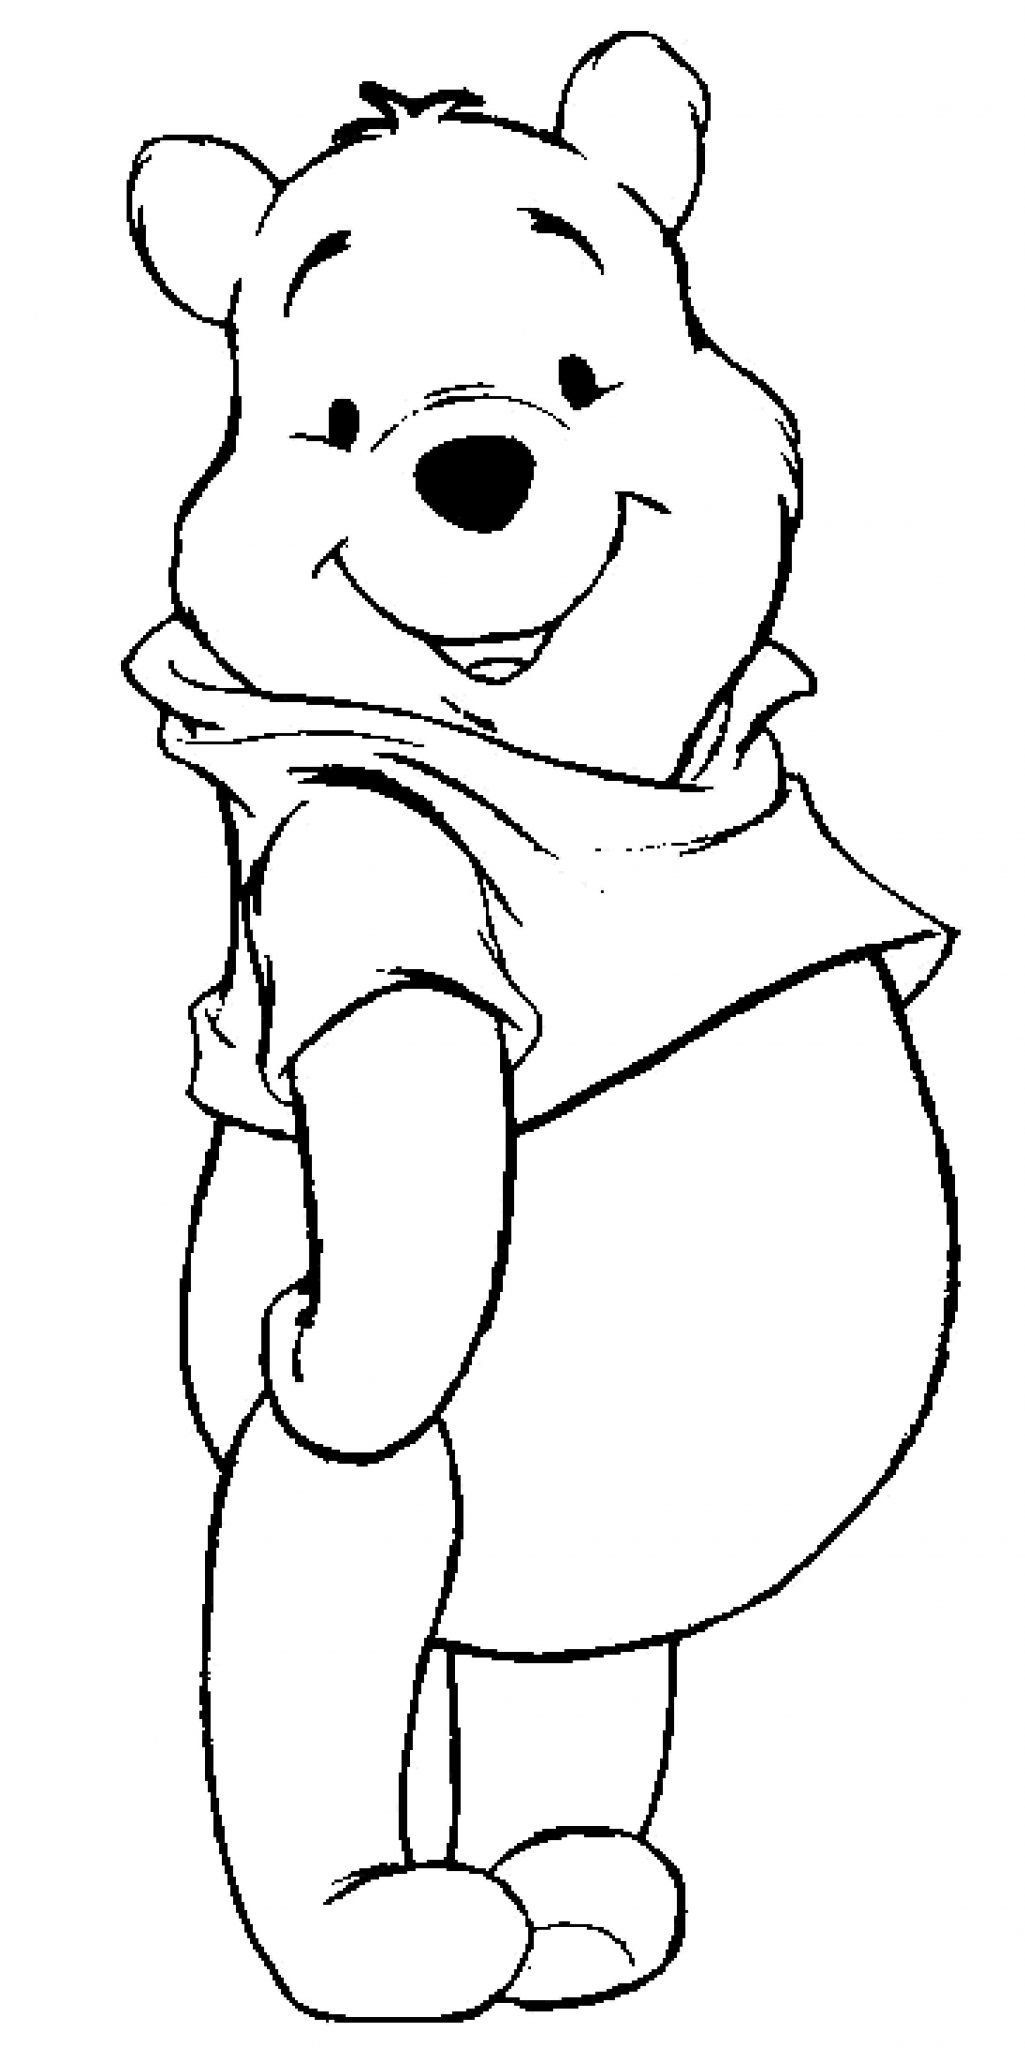 Coloring Sheets Kids
 33 Free Disney Coloring Pages for Kids